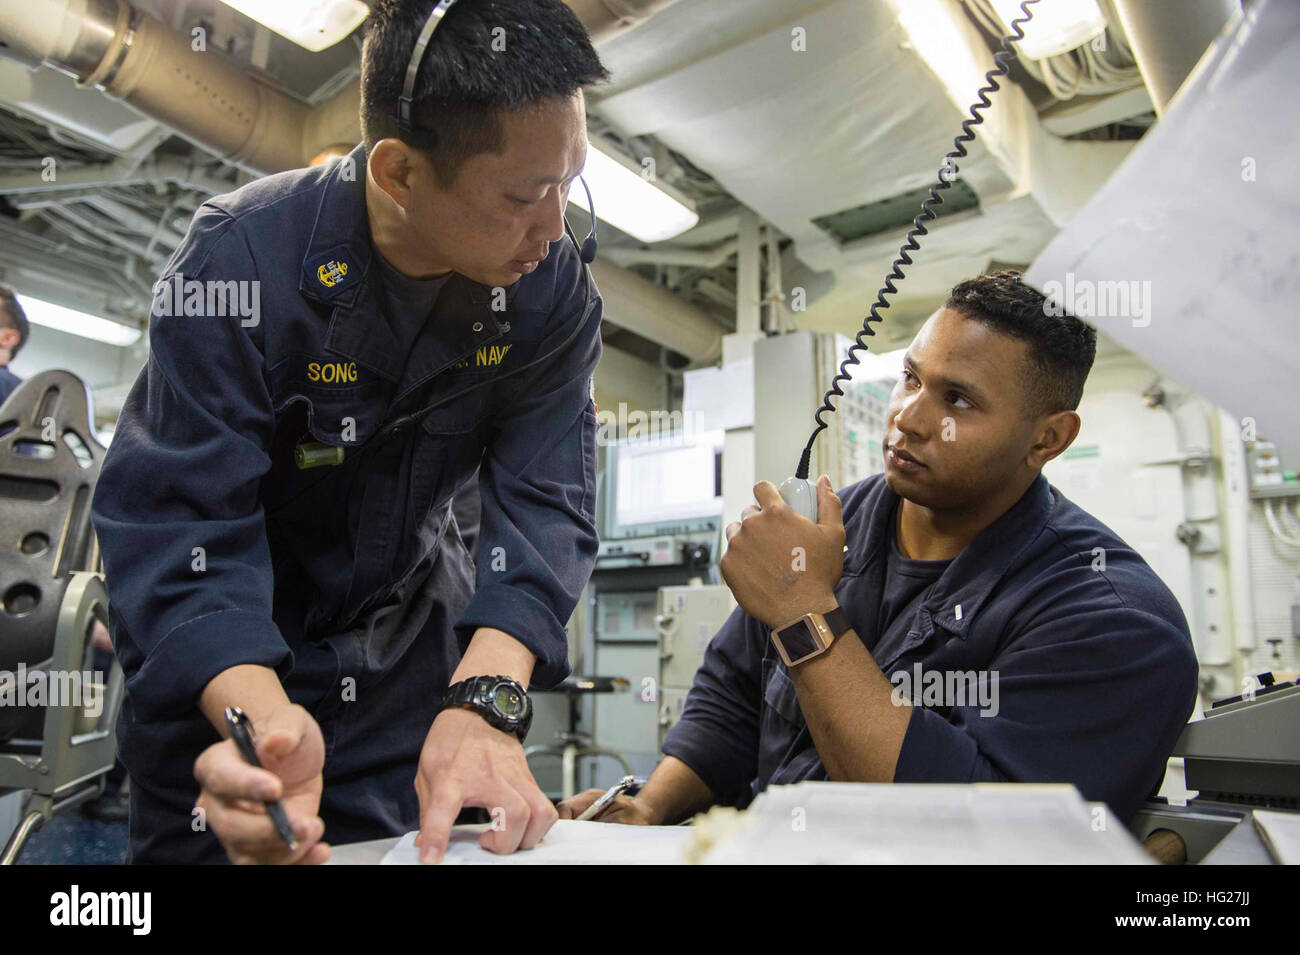 150525-N-VC236-002  GULF OF OMAN (May 25, 2015) - Chief Gas Turbine System Technician (Mechanical) Seung Song, from Jacksonville, Fla., gives instructions to Lt. j.g. Ramon Cortes, from Columbus, Ohio, during engineering training team drills aboard the guided-missile destroyer USS Farragut (DDG 99). Farragut is deployed to the U.S. 5th Fleet area of operations as part of Theodore Roosevelt Carrier Strike Group supporting Operation Inherent Resolve, strike operations in Iraq and Syria as directed, maritime security operations and theater security cooperation efforts in the region. (U.S. Navy ph Stock Photo